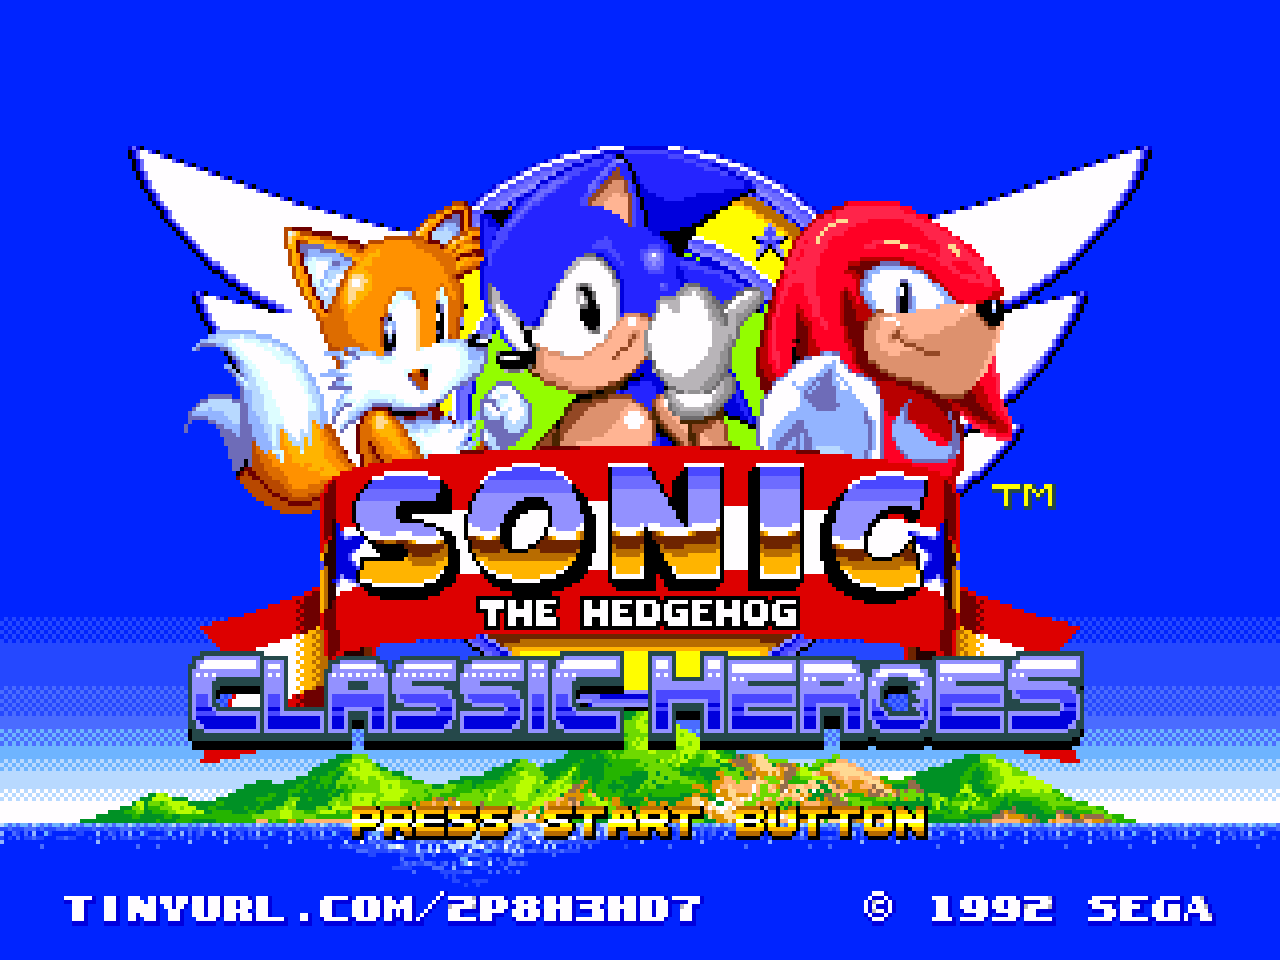 Play Genesis Super Sonic & Hyper Sonic in Sonic 1 Online in your browser 